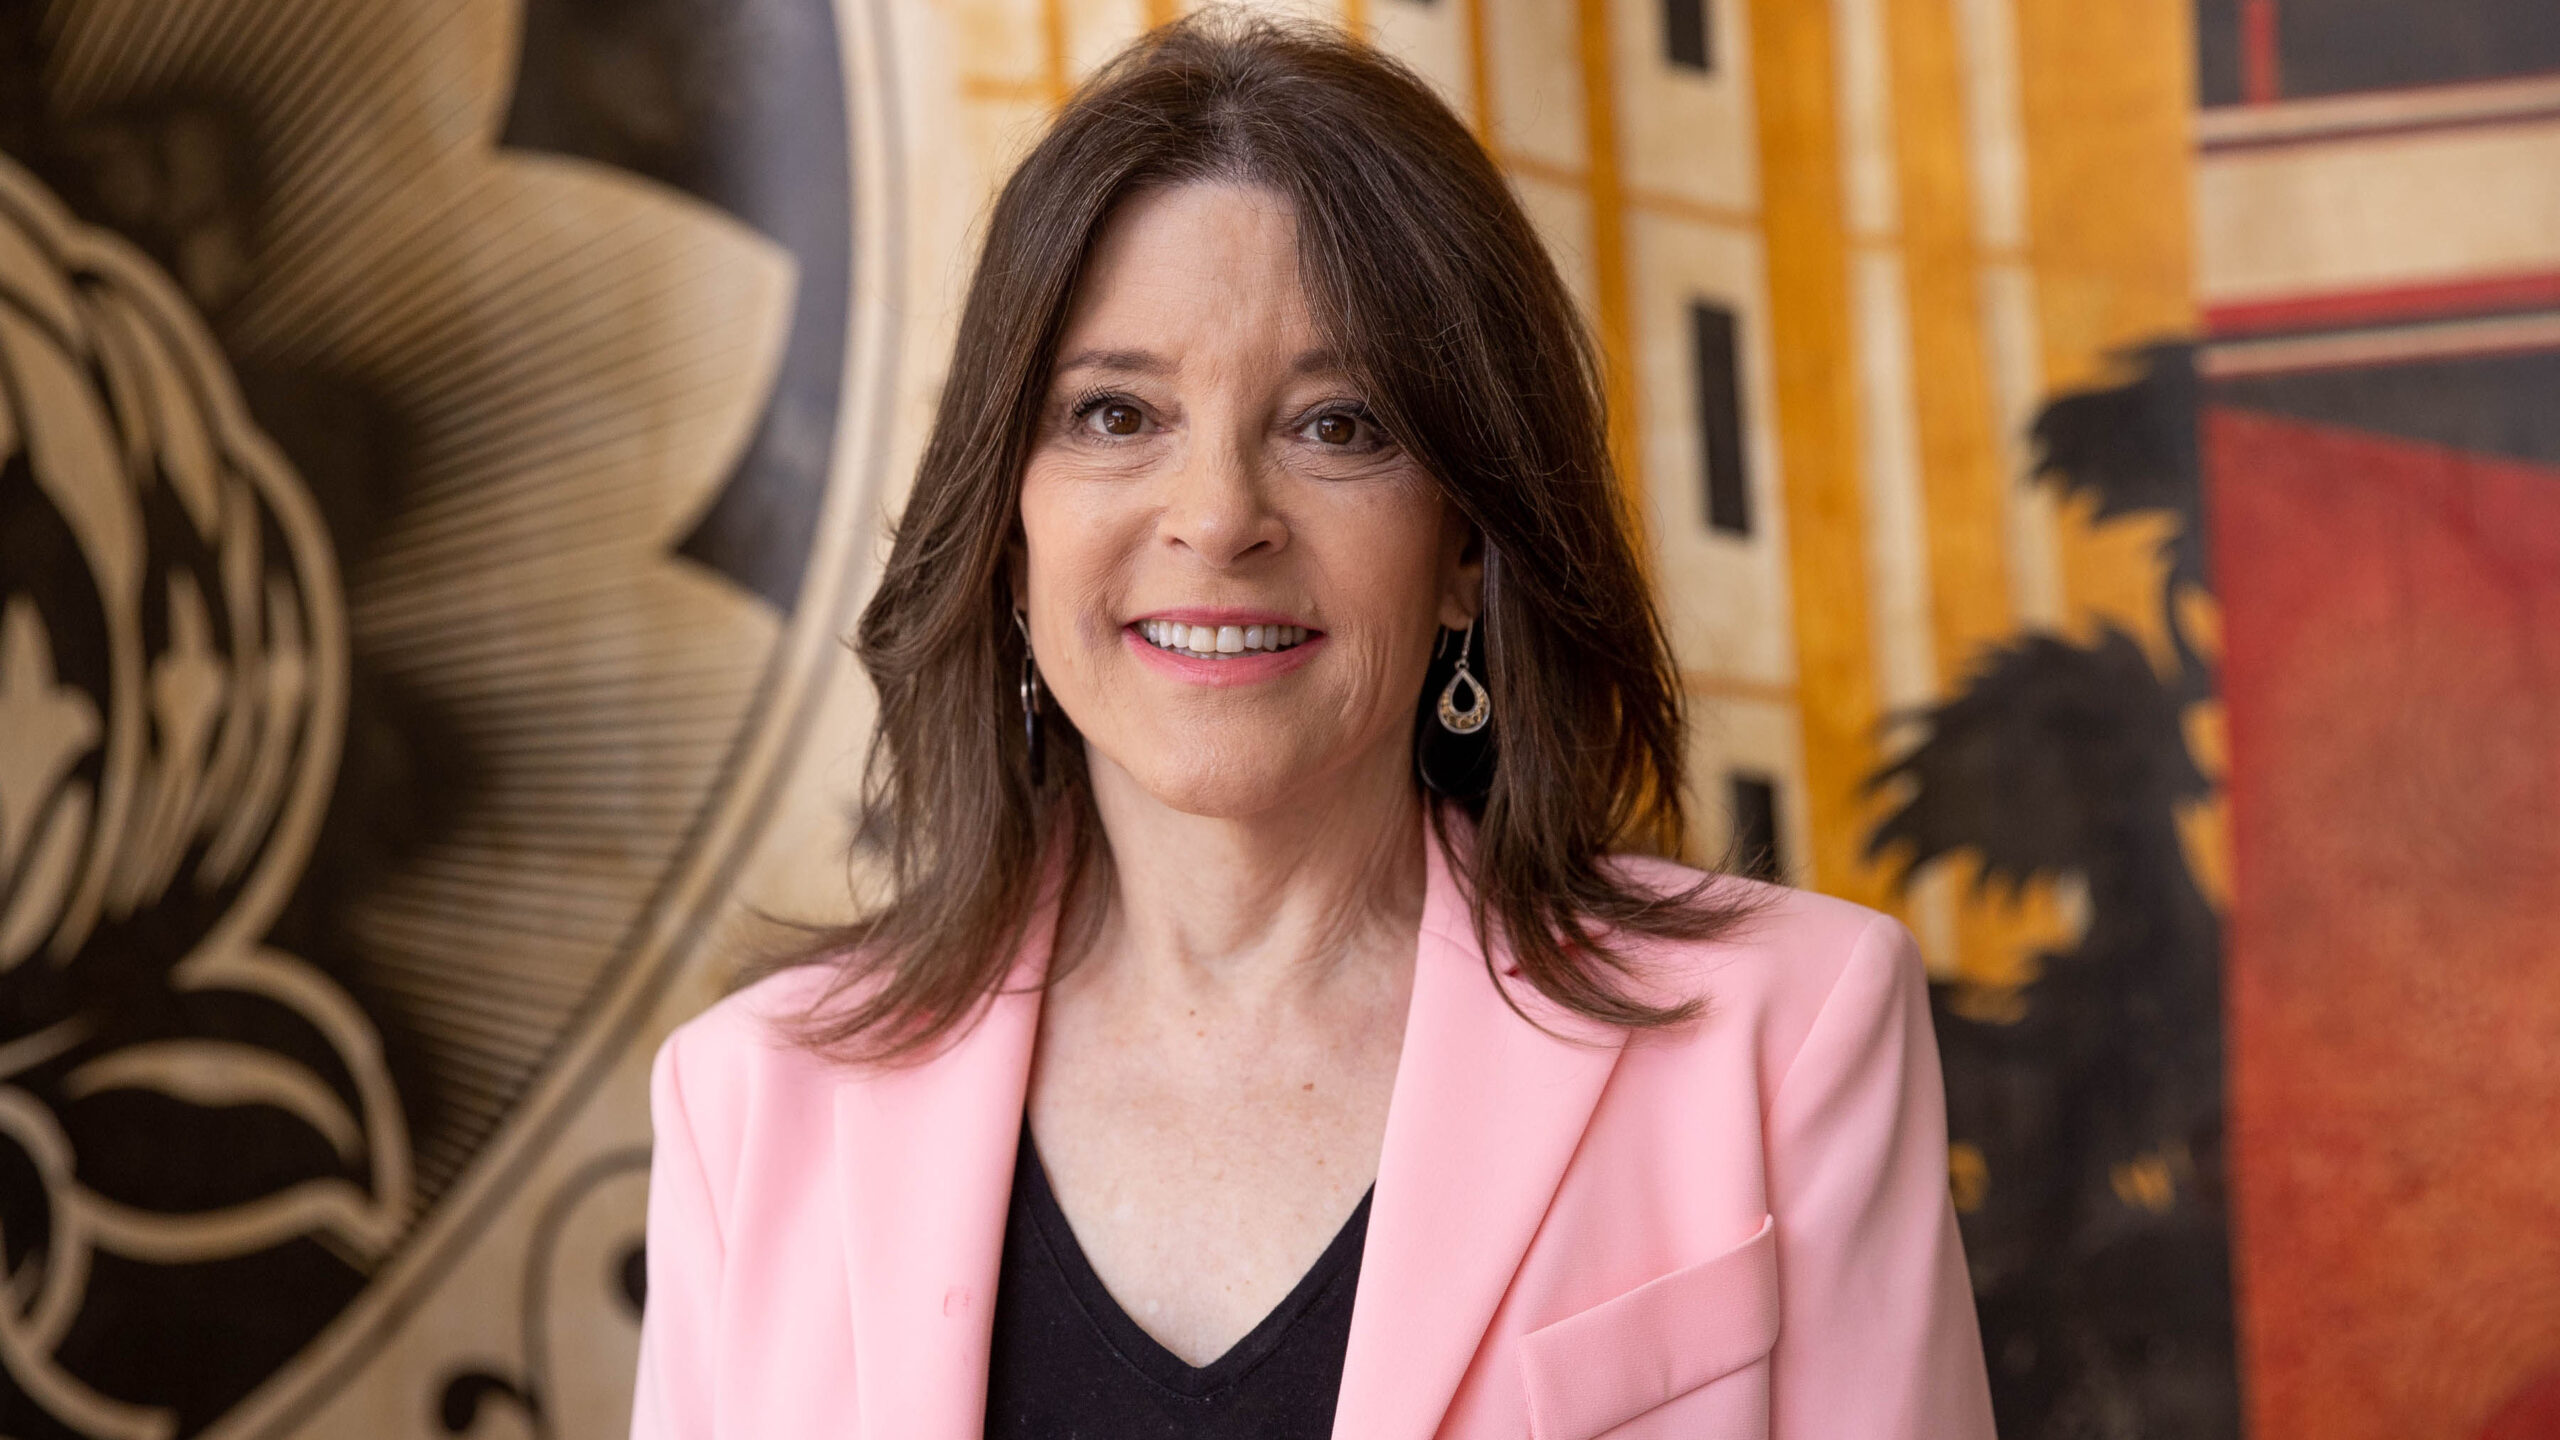 Marianne Williamson Launches Another Bid For President As A Democrat